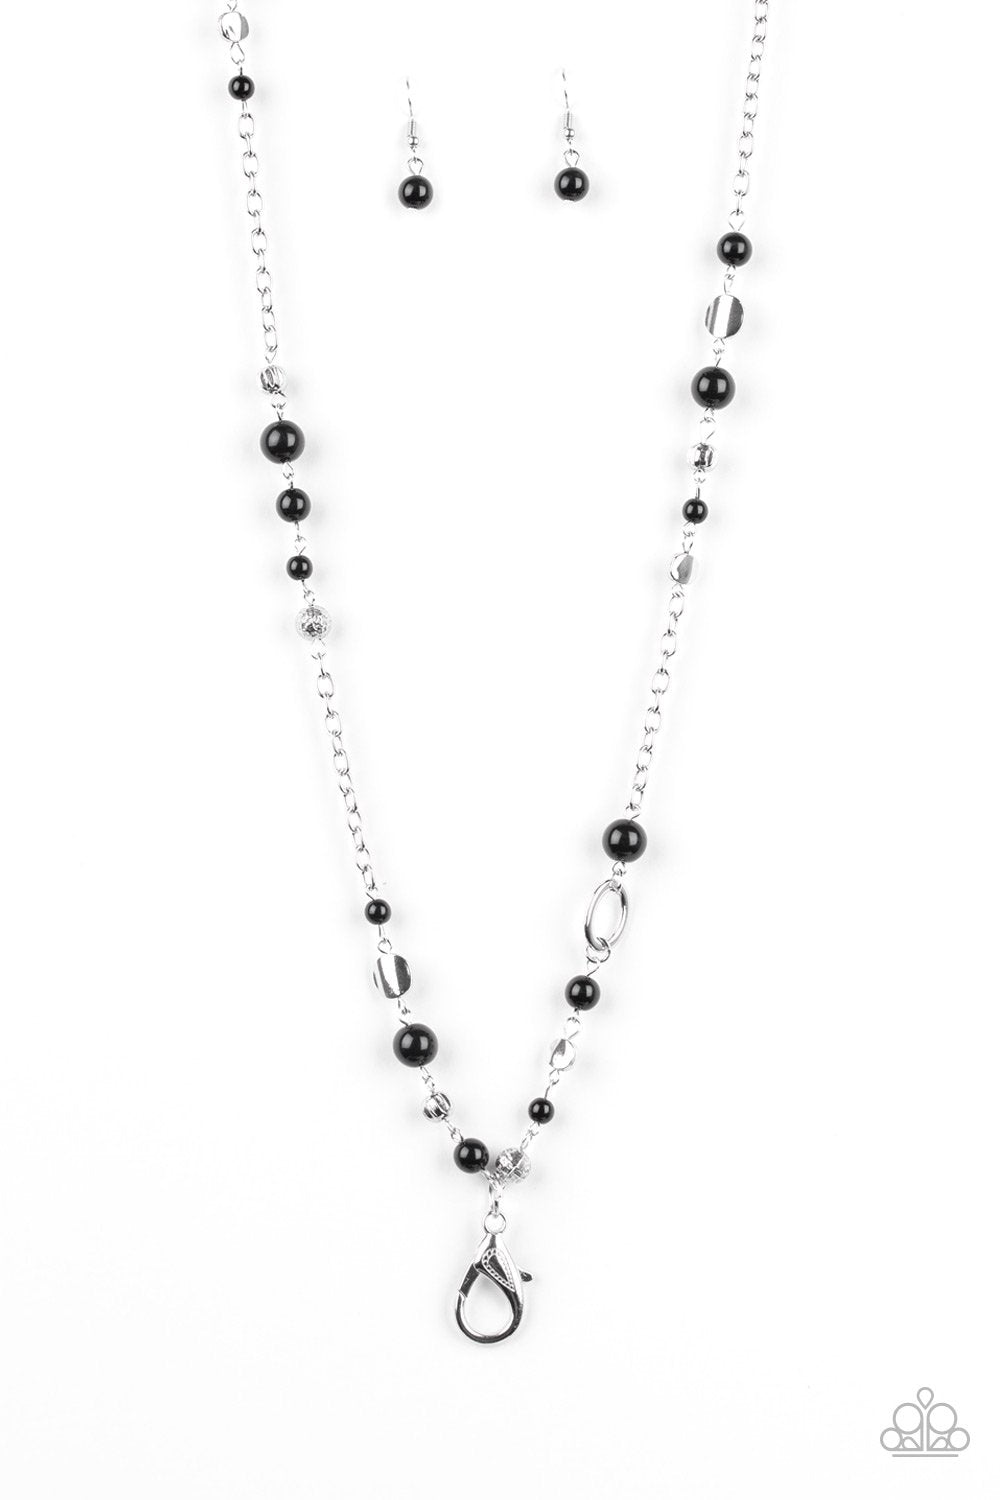 Make An Appearance Black and Silver Lanyard Necklace - Paparazzi Accessories-CarasShop.com - $5 Jewelry by Cara Jewels